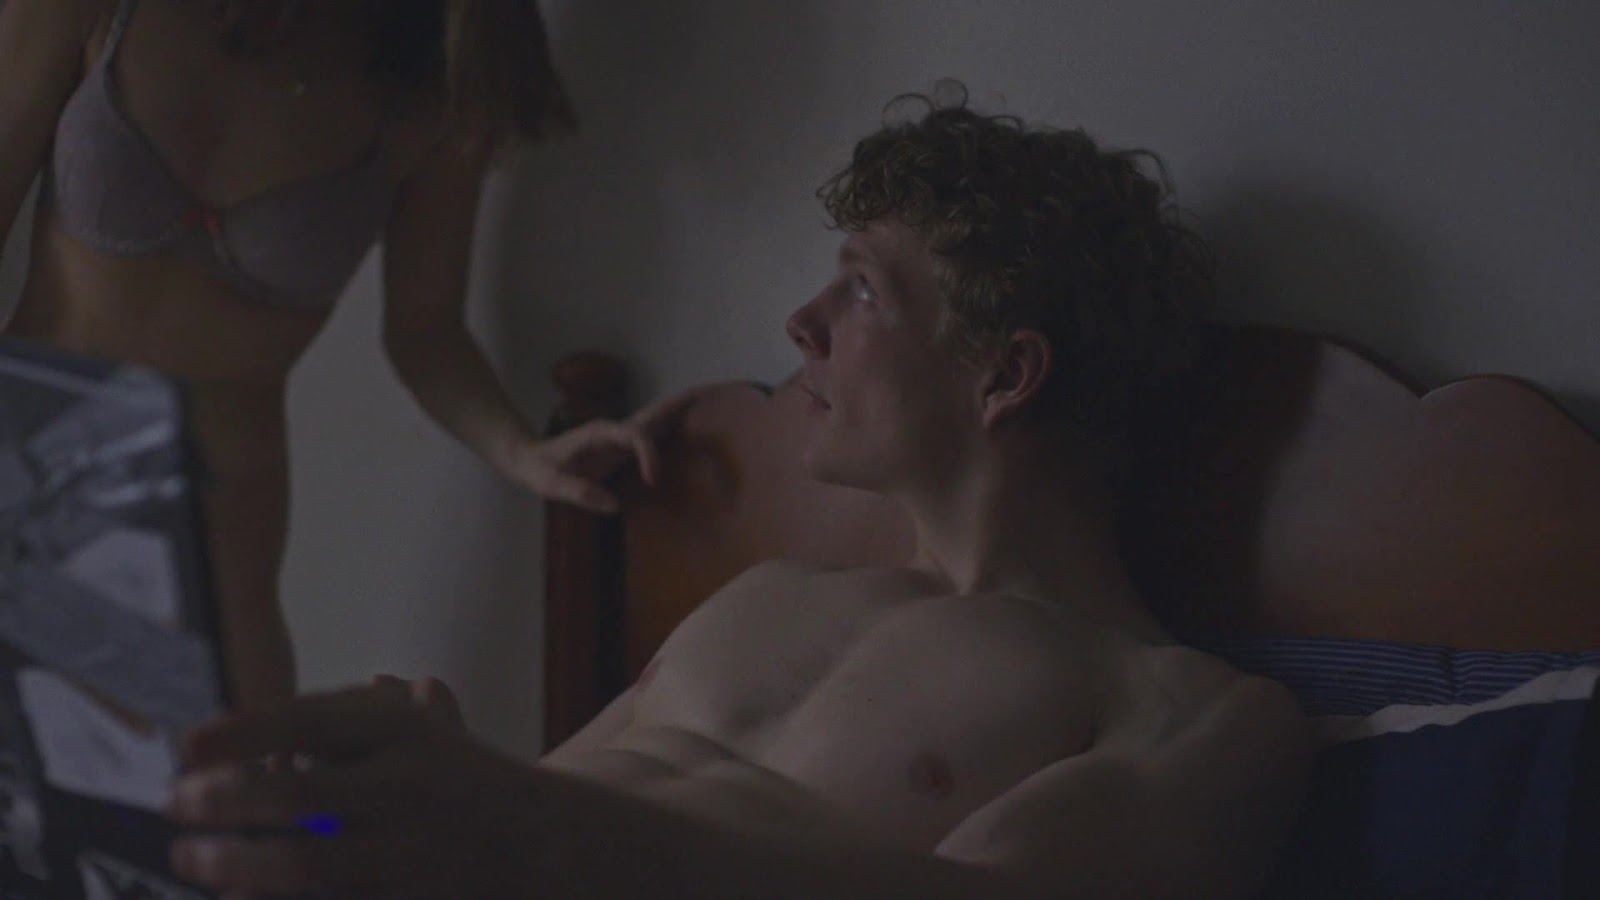 The Stars Come Out To Play: Patrick Gibson - Naked in "The OA" .